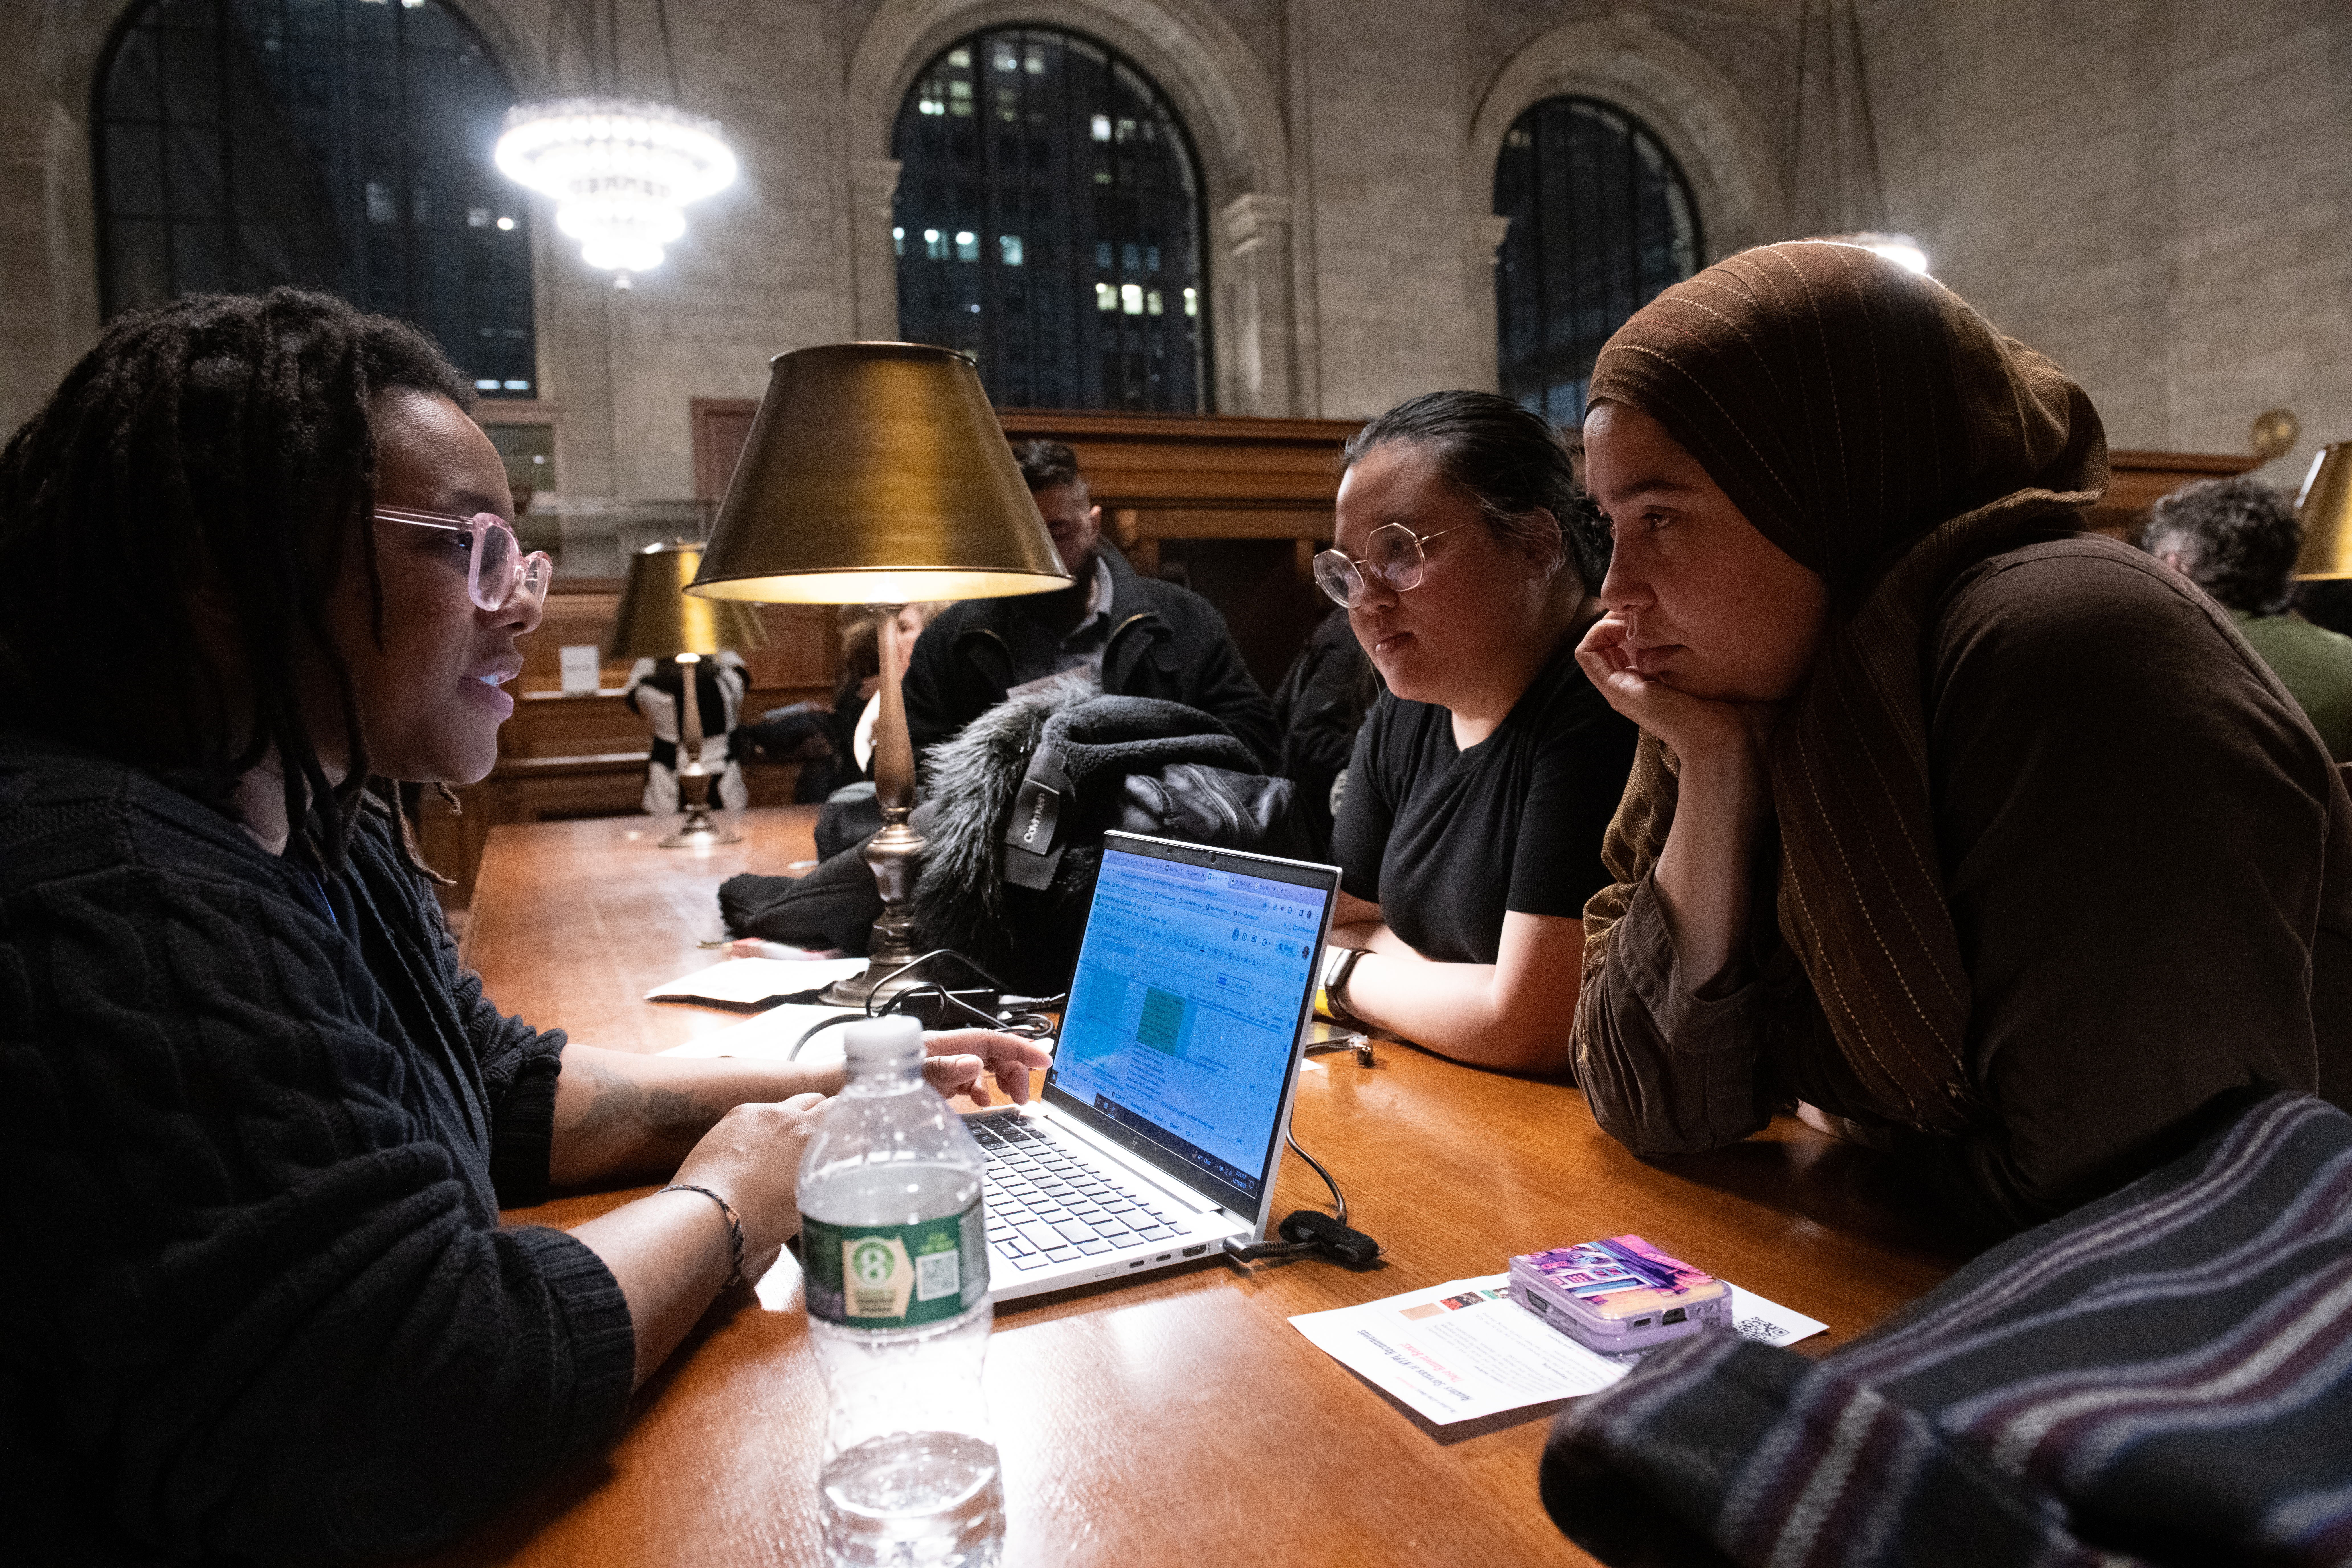 A librarian with a laptop helps to two female patrons in the Rose Reading Room of the New York Public Library